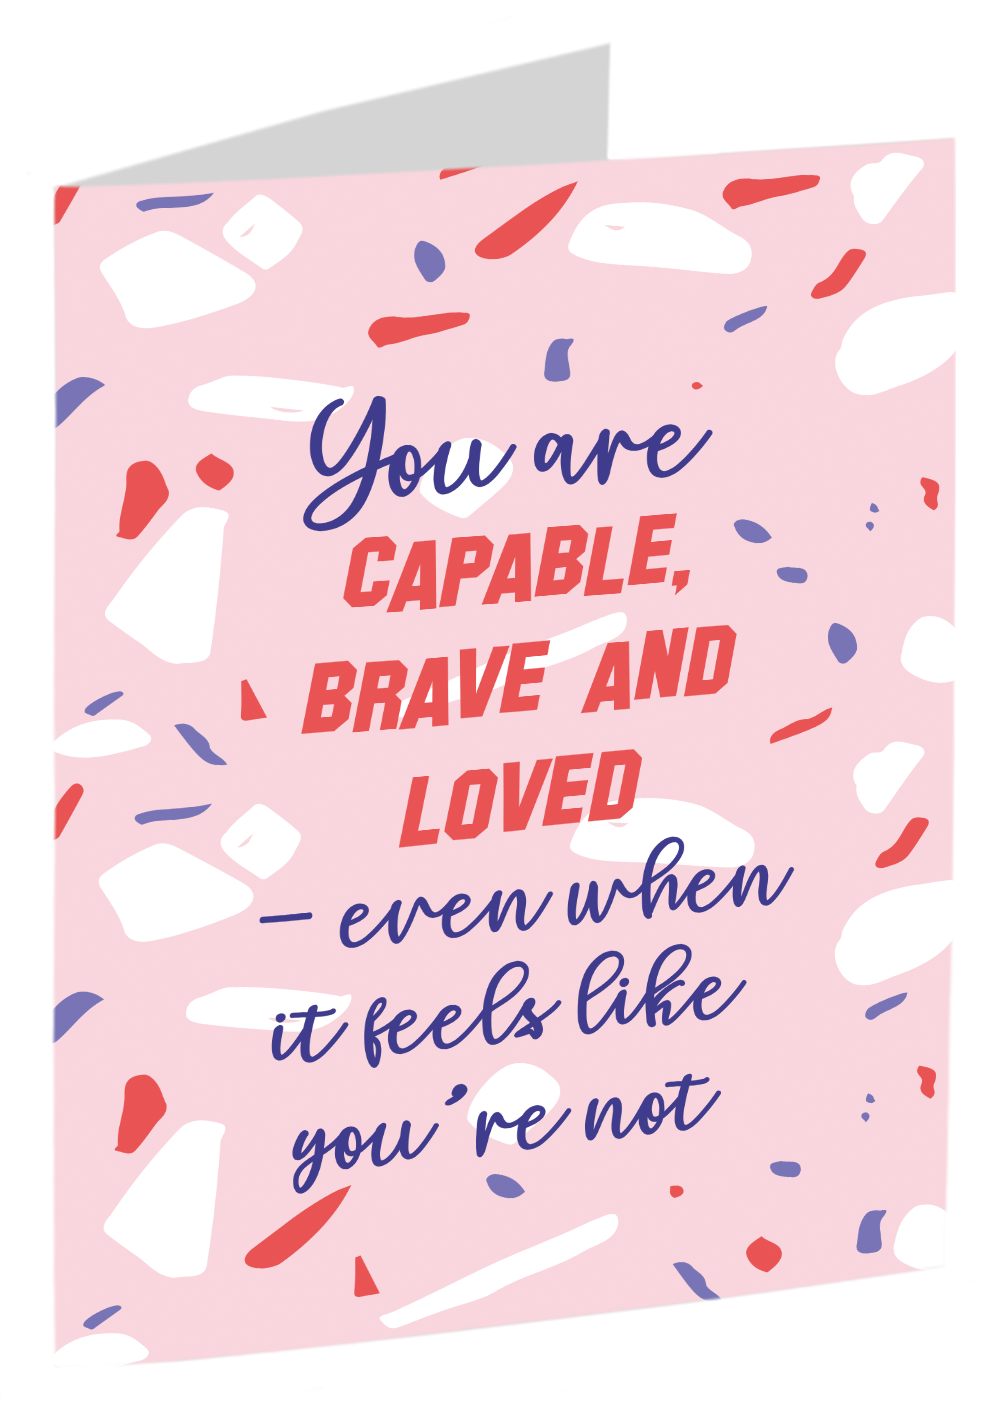 You Are Capable, Brave And Loved - Even When It Feels Like You're Not